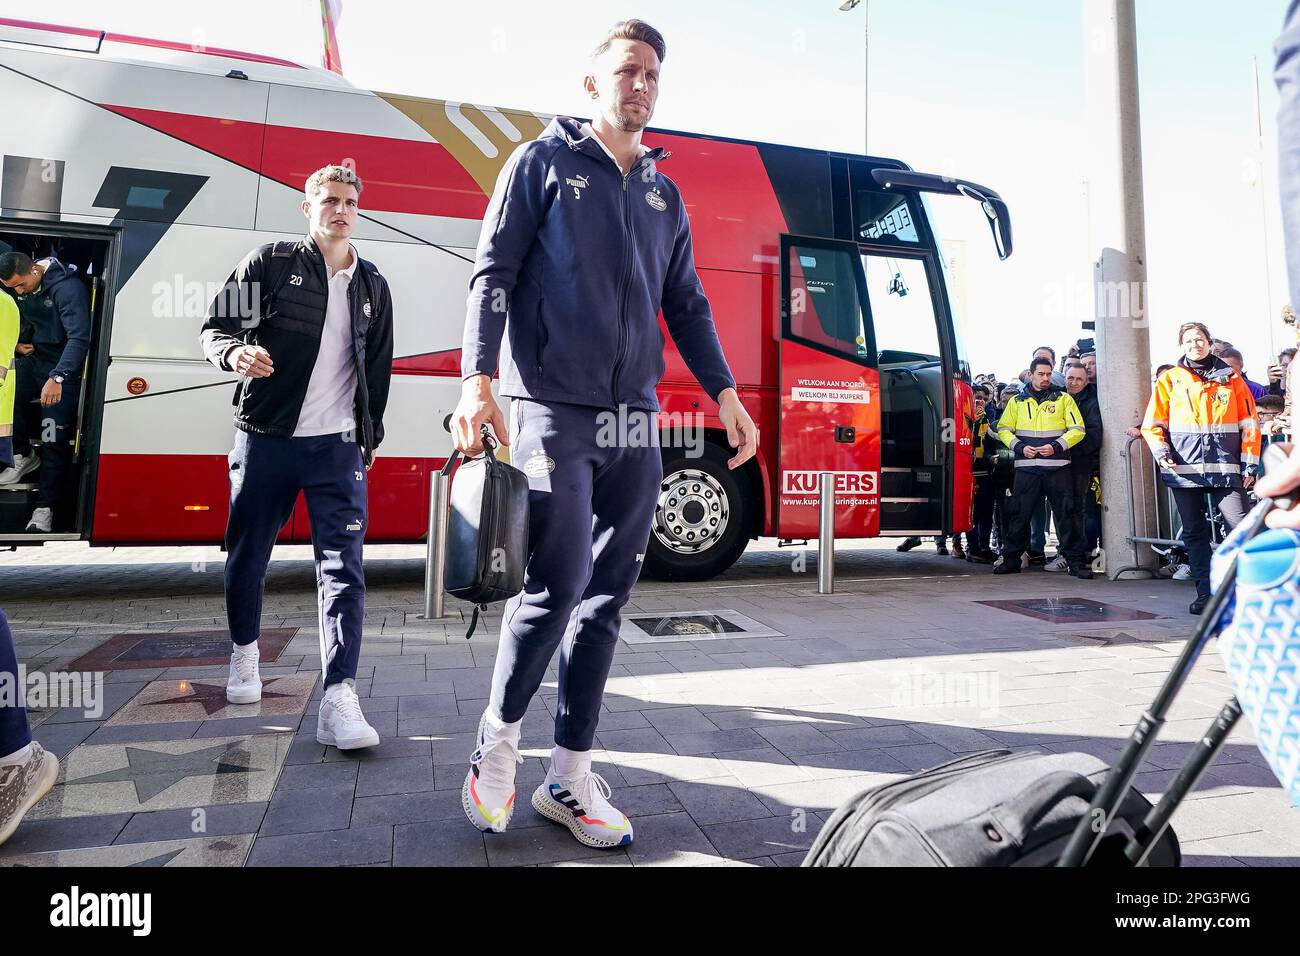 ARNHEM, NETHERLANDS - MARCH 19: Guus Til of PSV and Luuk de Jong of PSV arrive prior to the Eredivisie match between Vitesse and PSV at the GelreDome Stock Photo